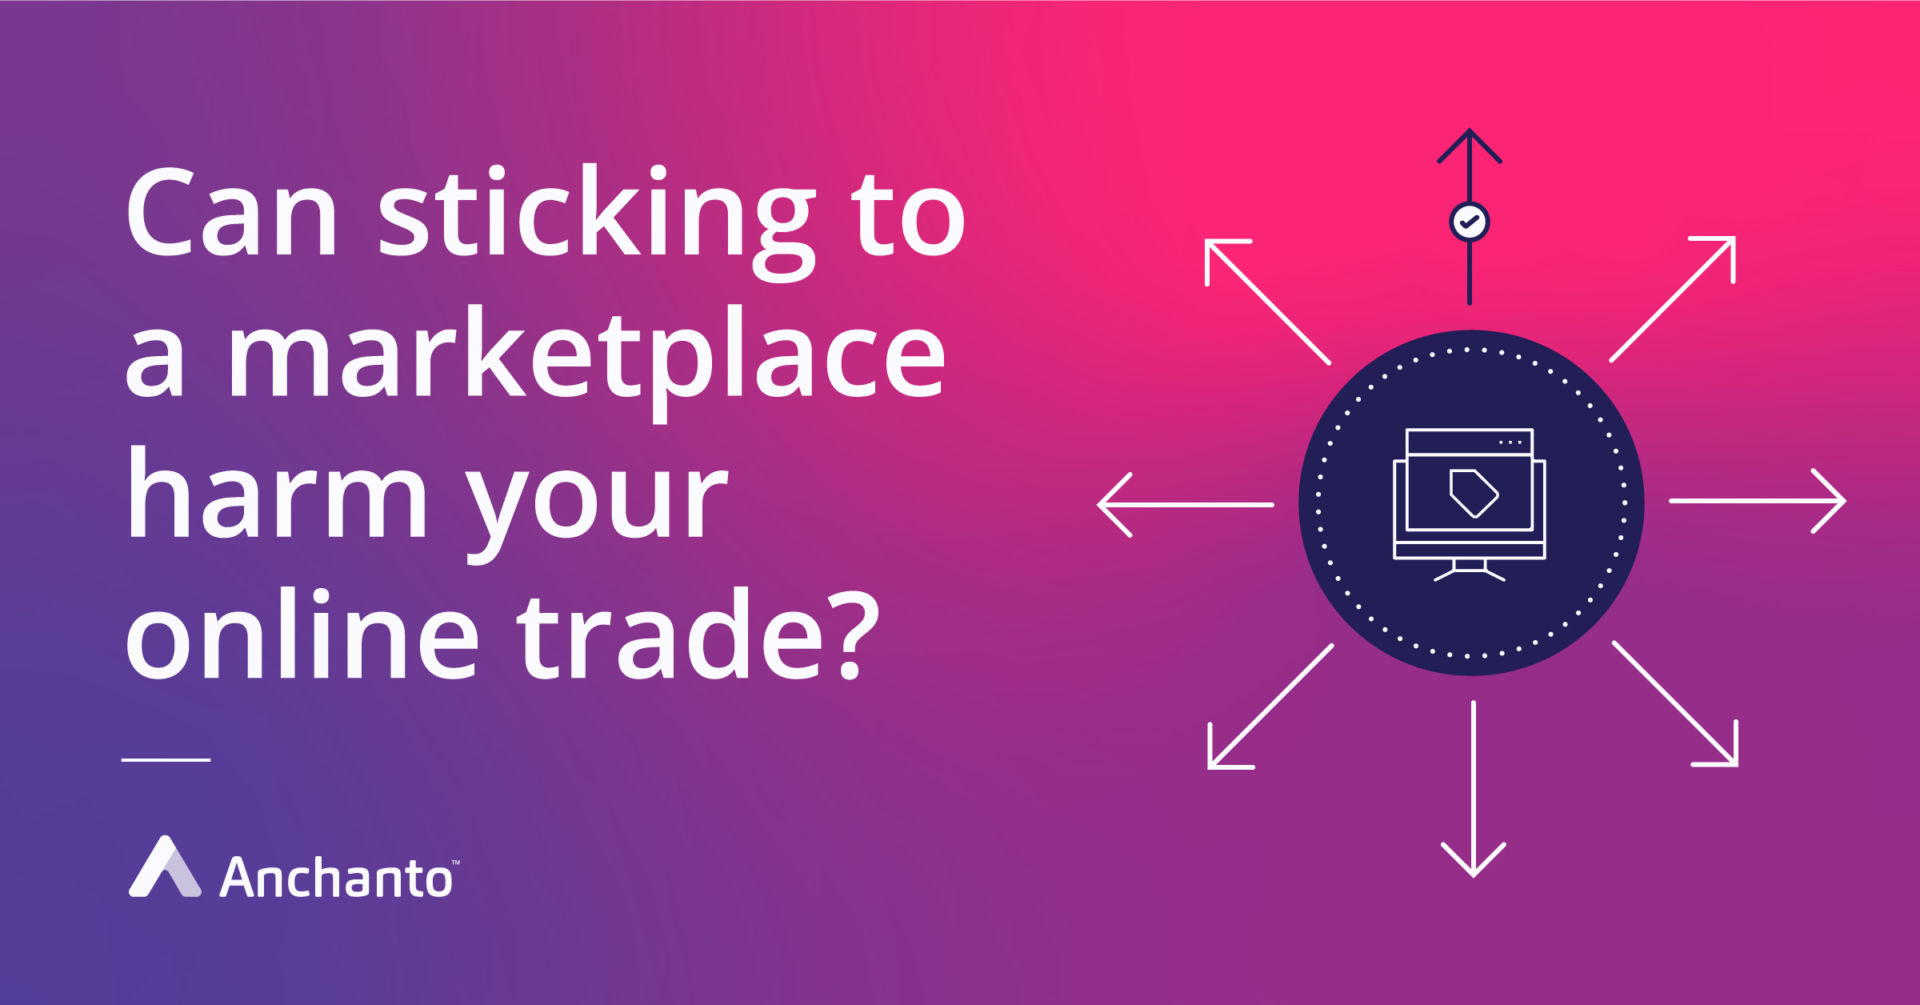 Can sticking to a marketplace harm your online trade?